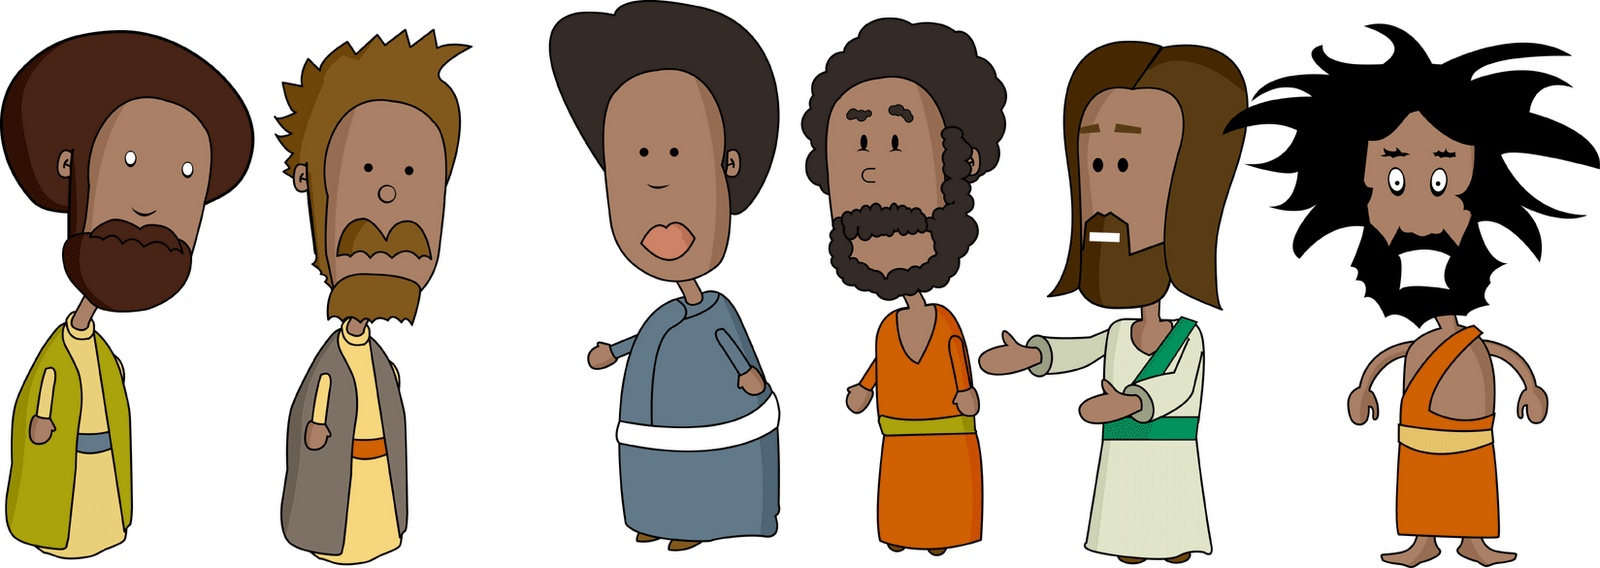 free christian clipart bible characters - photo #31